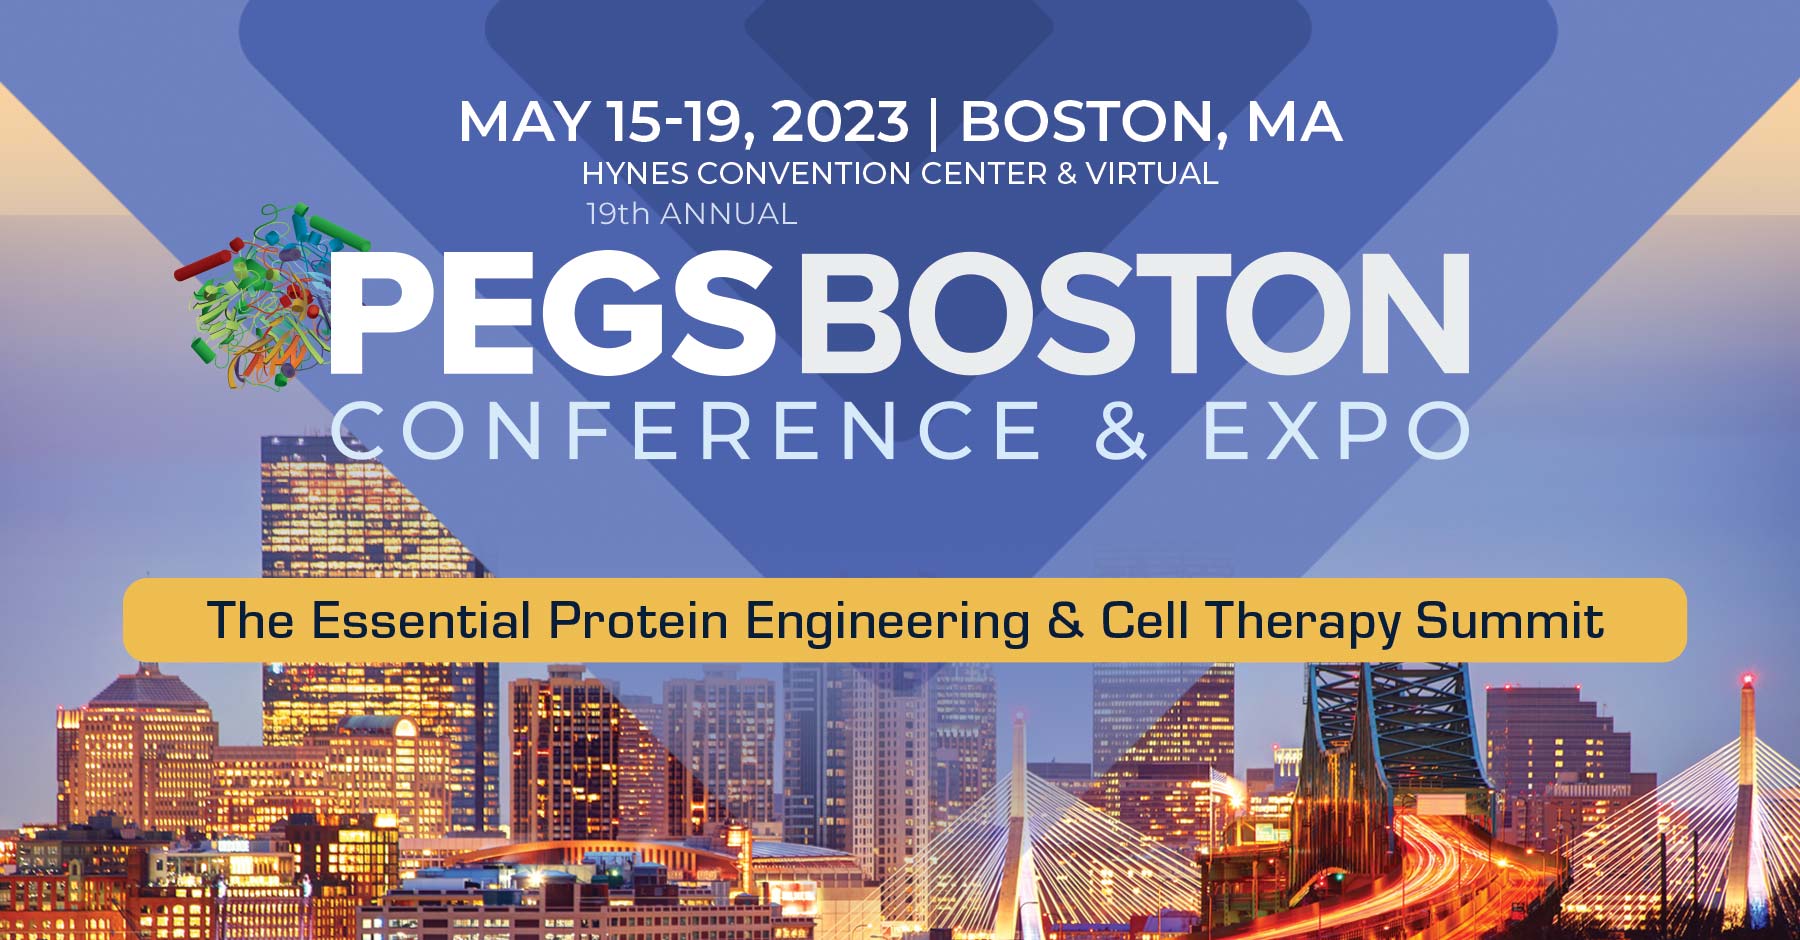 PEGS Boston conference & expo flyer